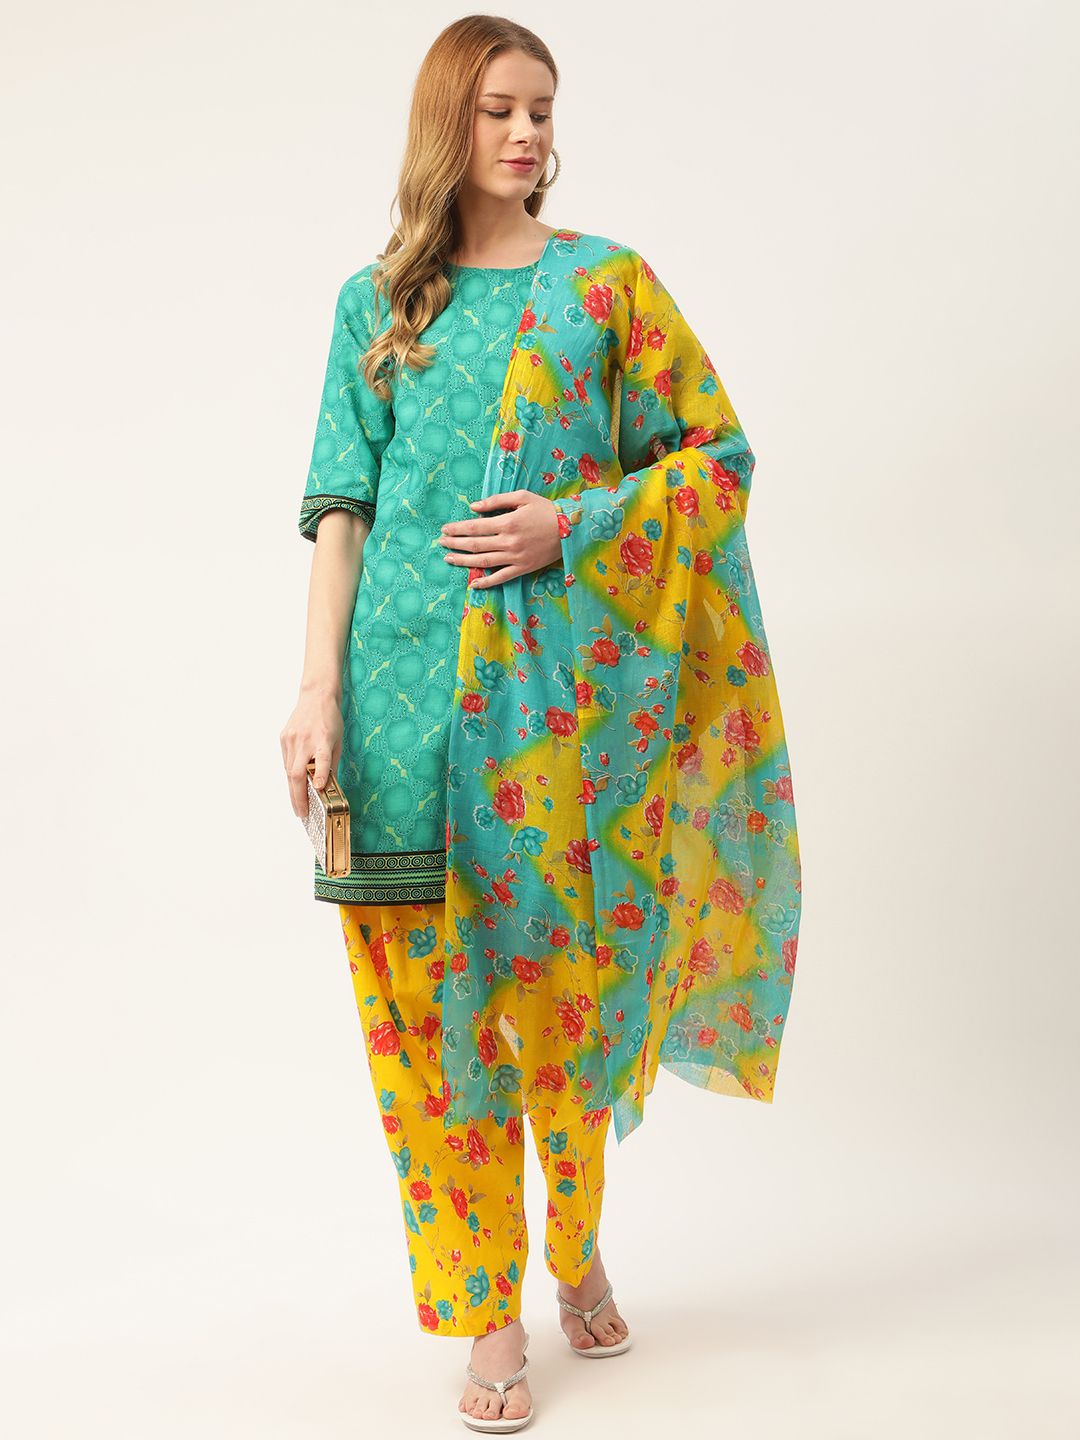 PIRKO Green & Yellow Printed Pure Cotton Unstitched Dress Material Price in India